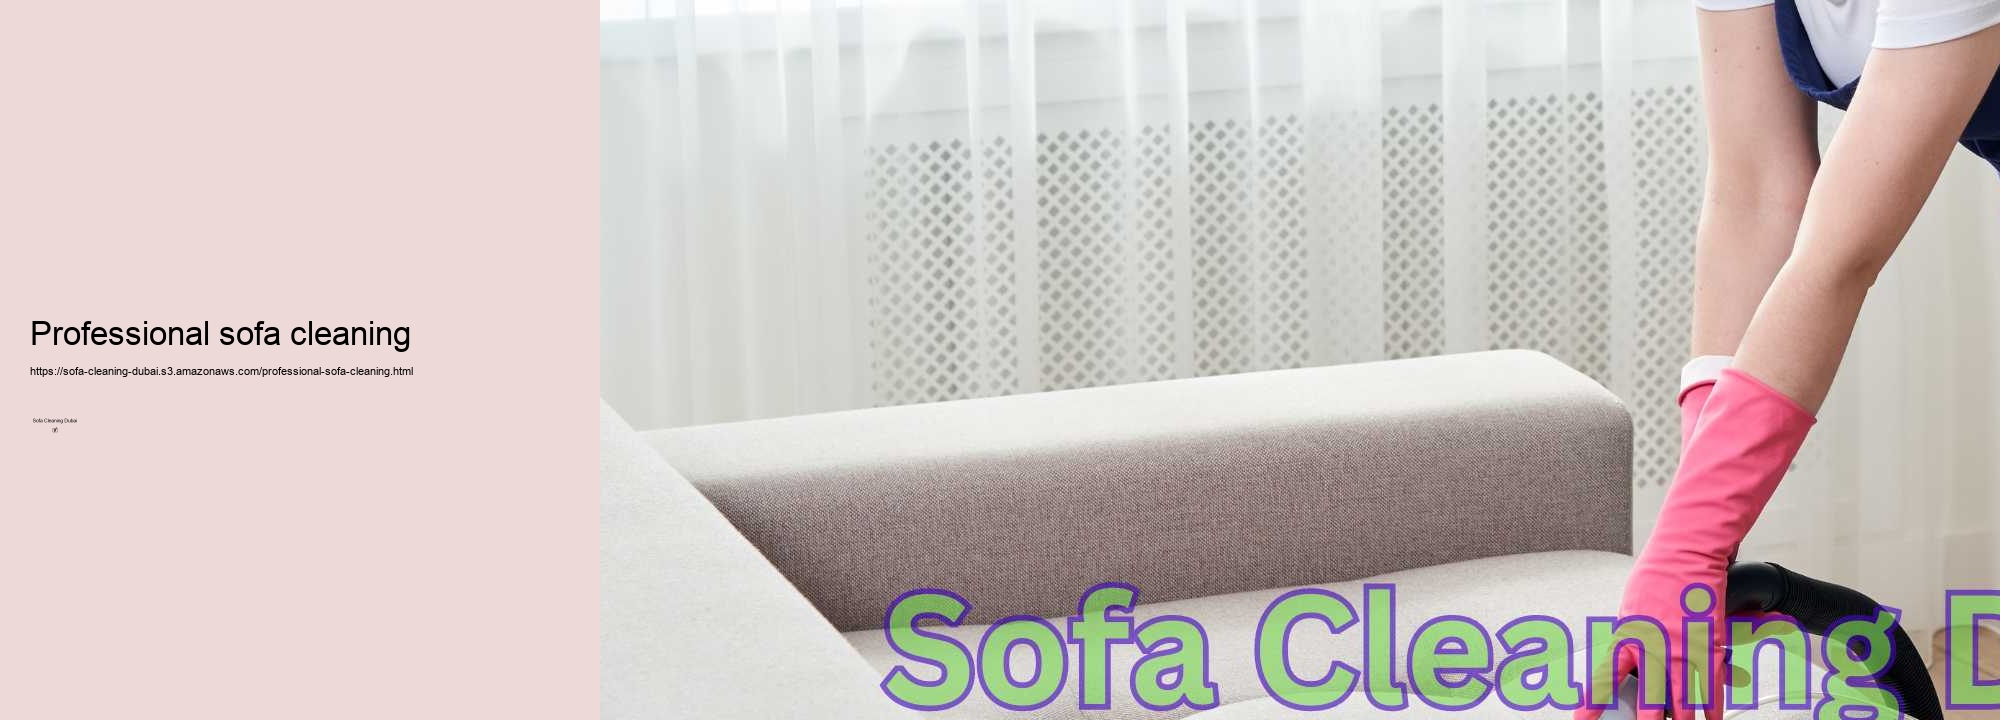 Professional sofa cleaning